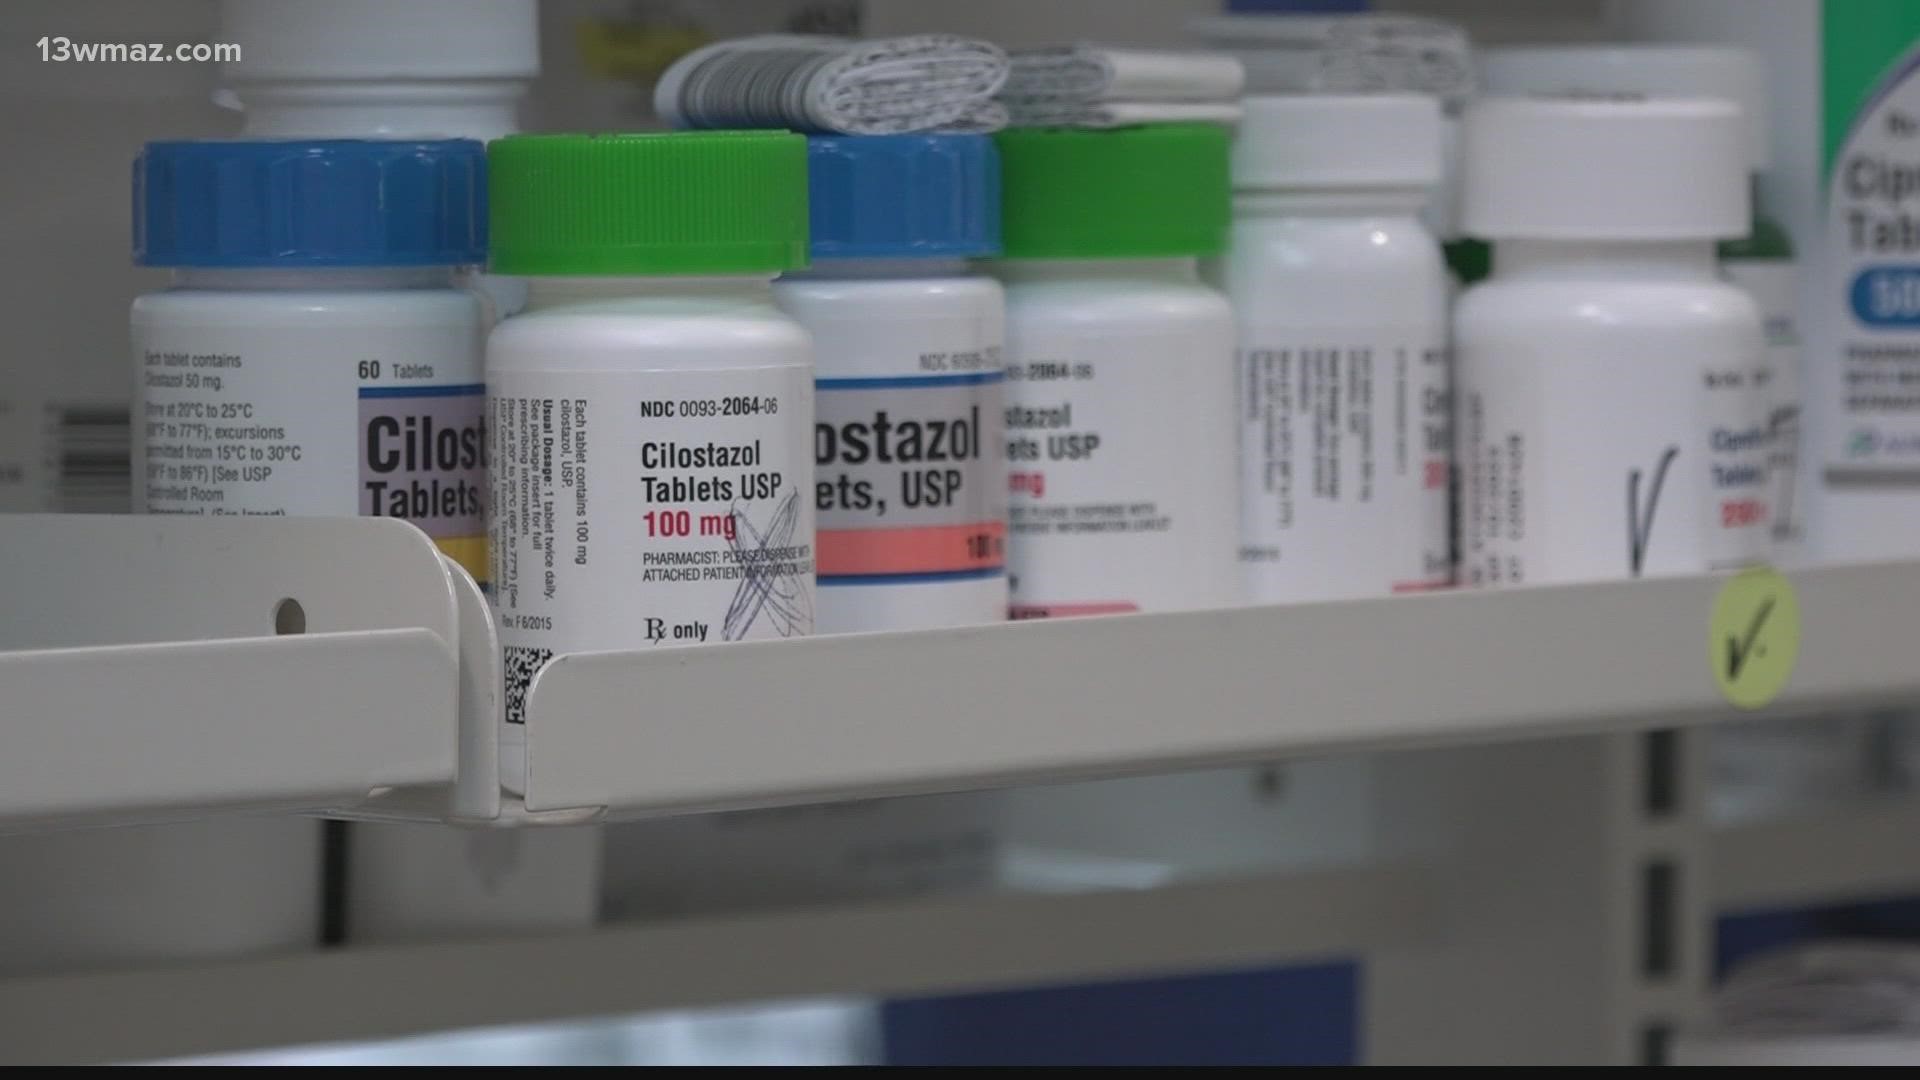 Ways to save: tips on how to make prescription medication more affordable.